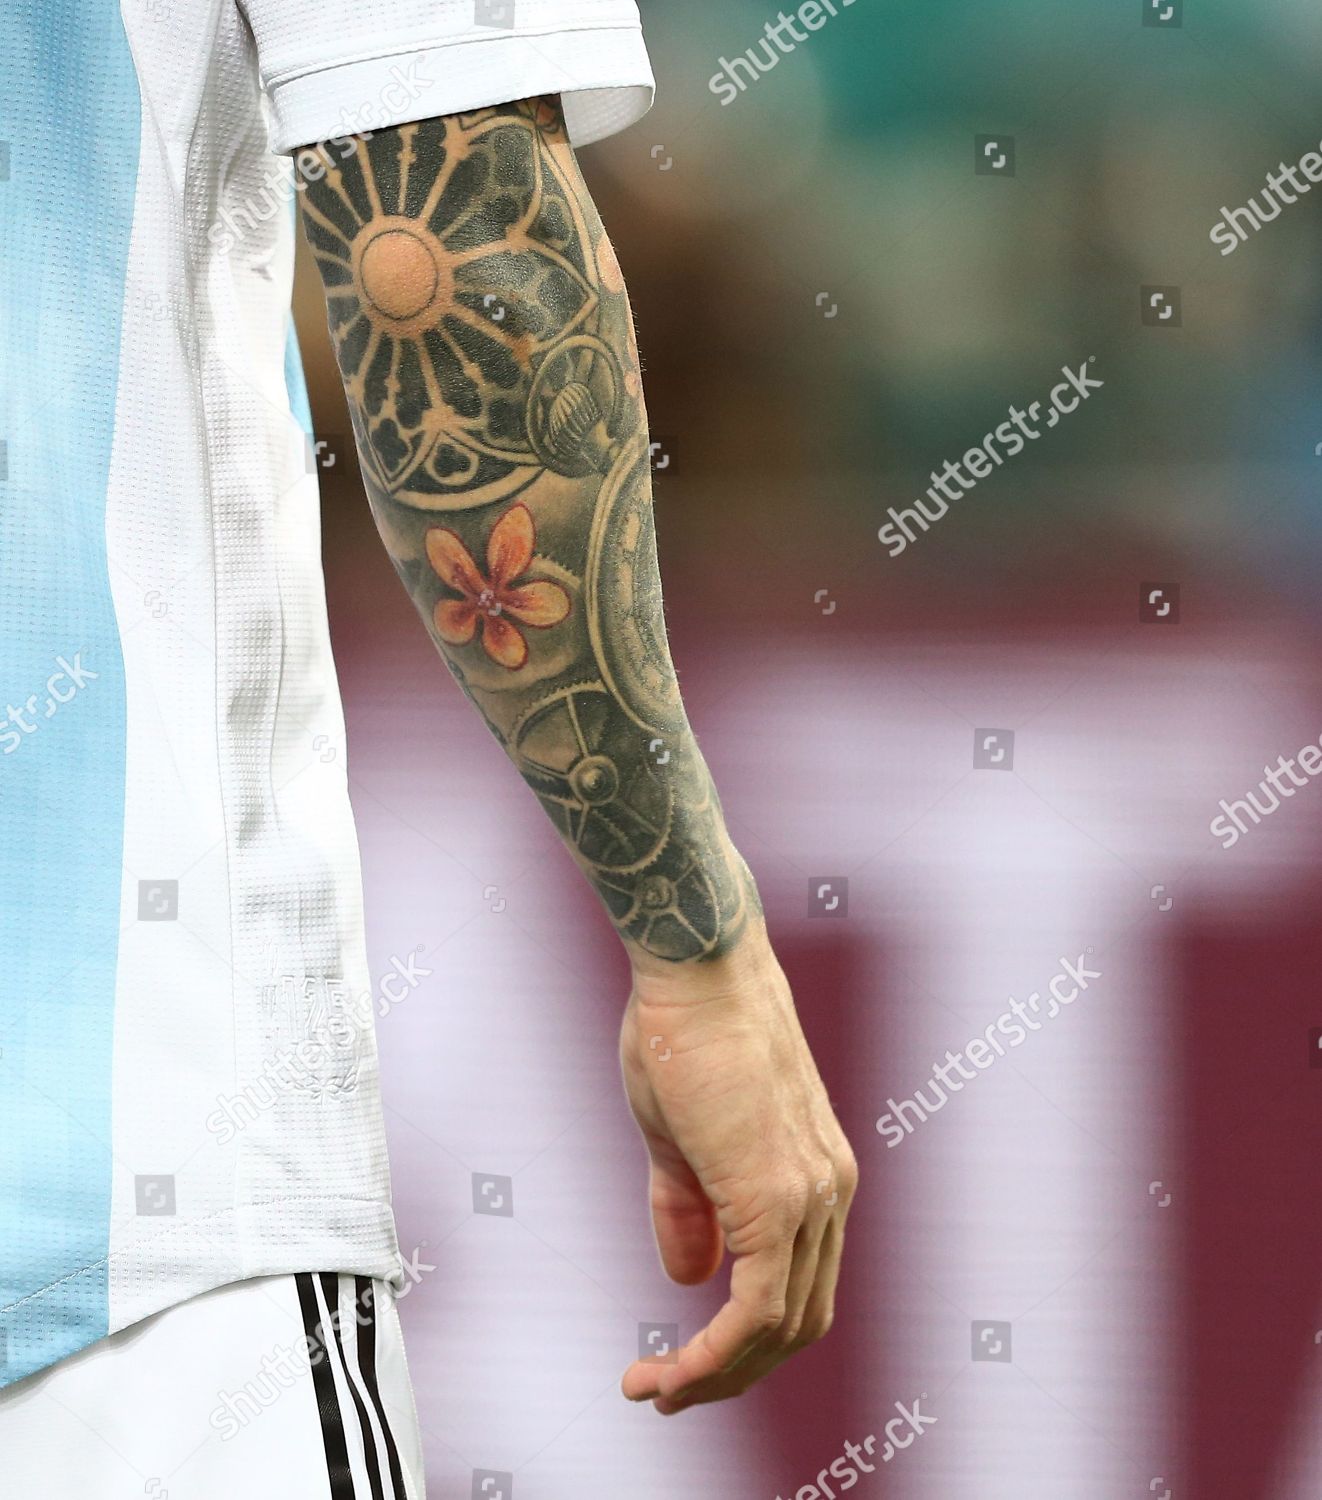 Tattoo On Arm Lionel Messi Argentina Editorial Stock Photo  Stock Image   Shutterstock